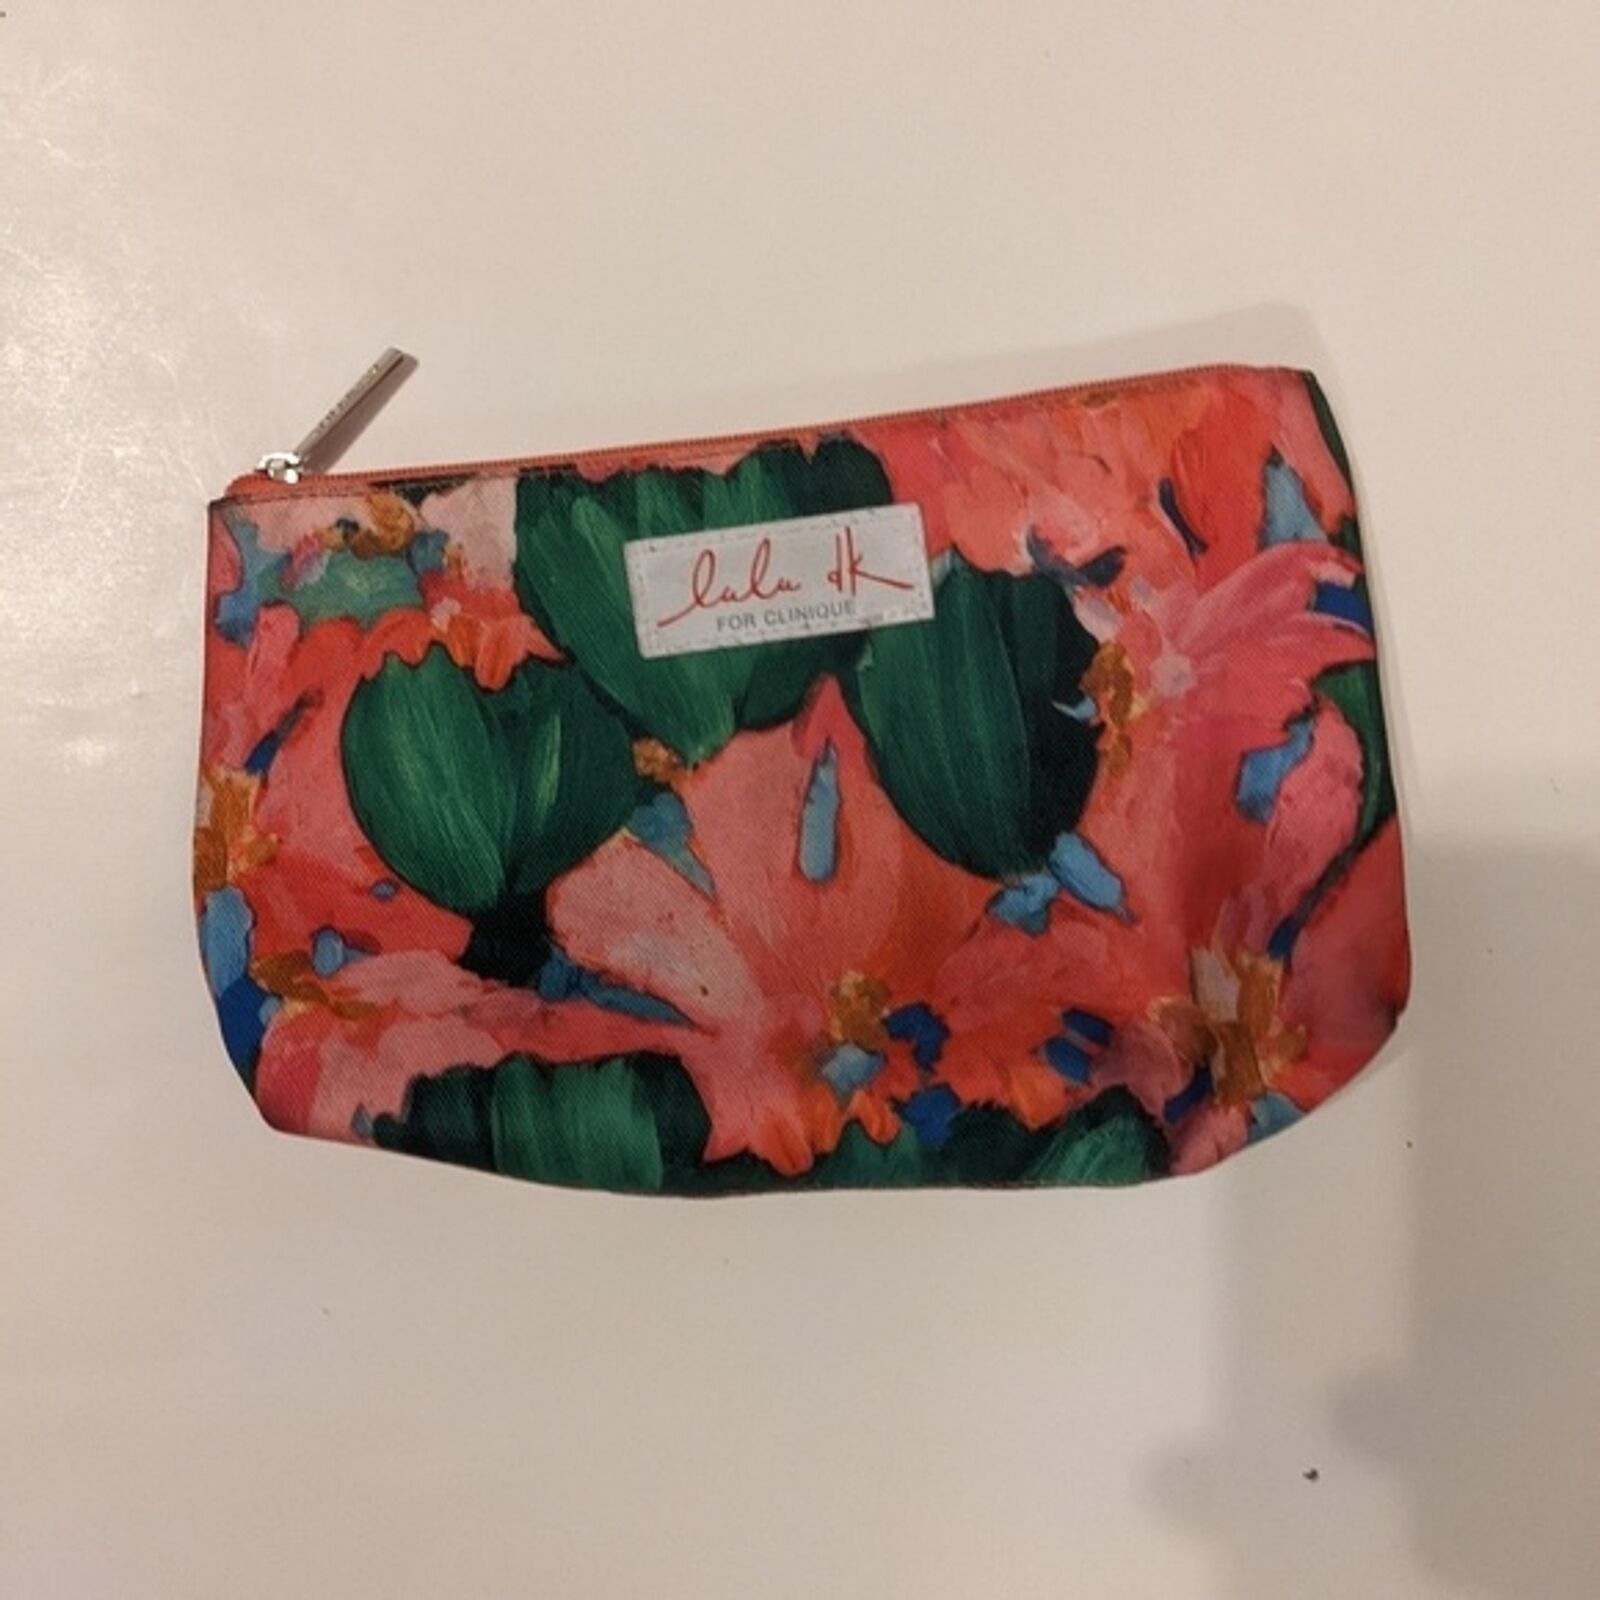 Lulu dk for Clinique cosmetic purse - $4.94